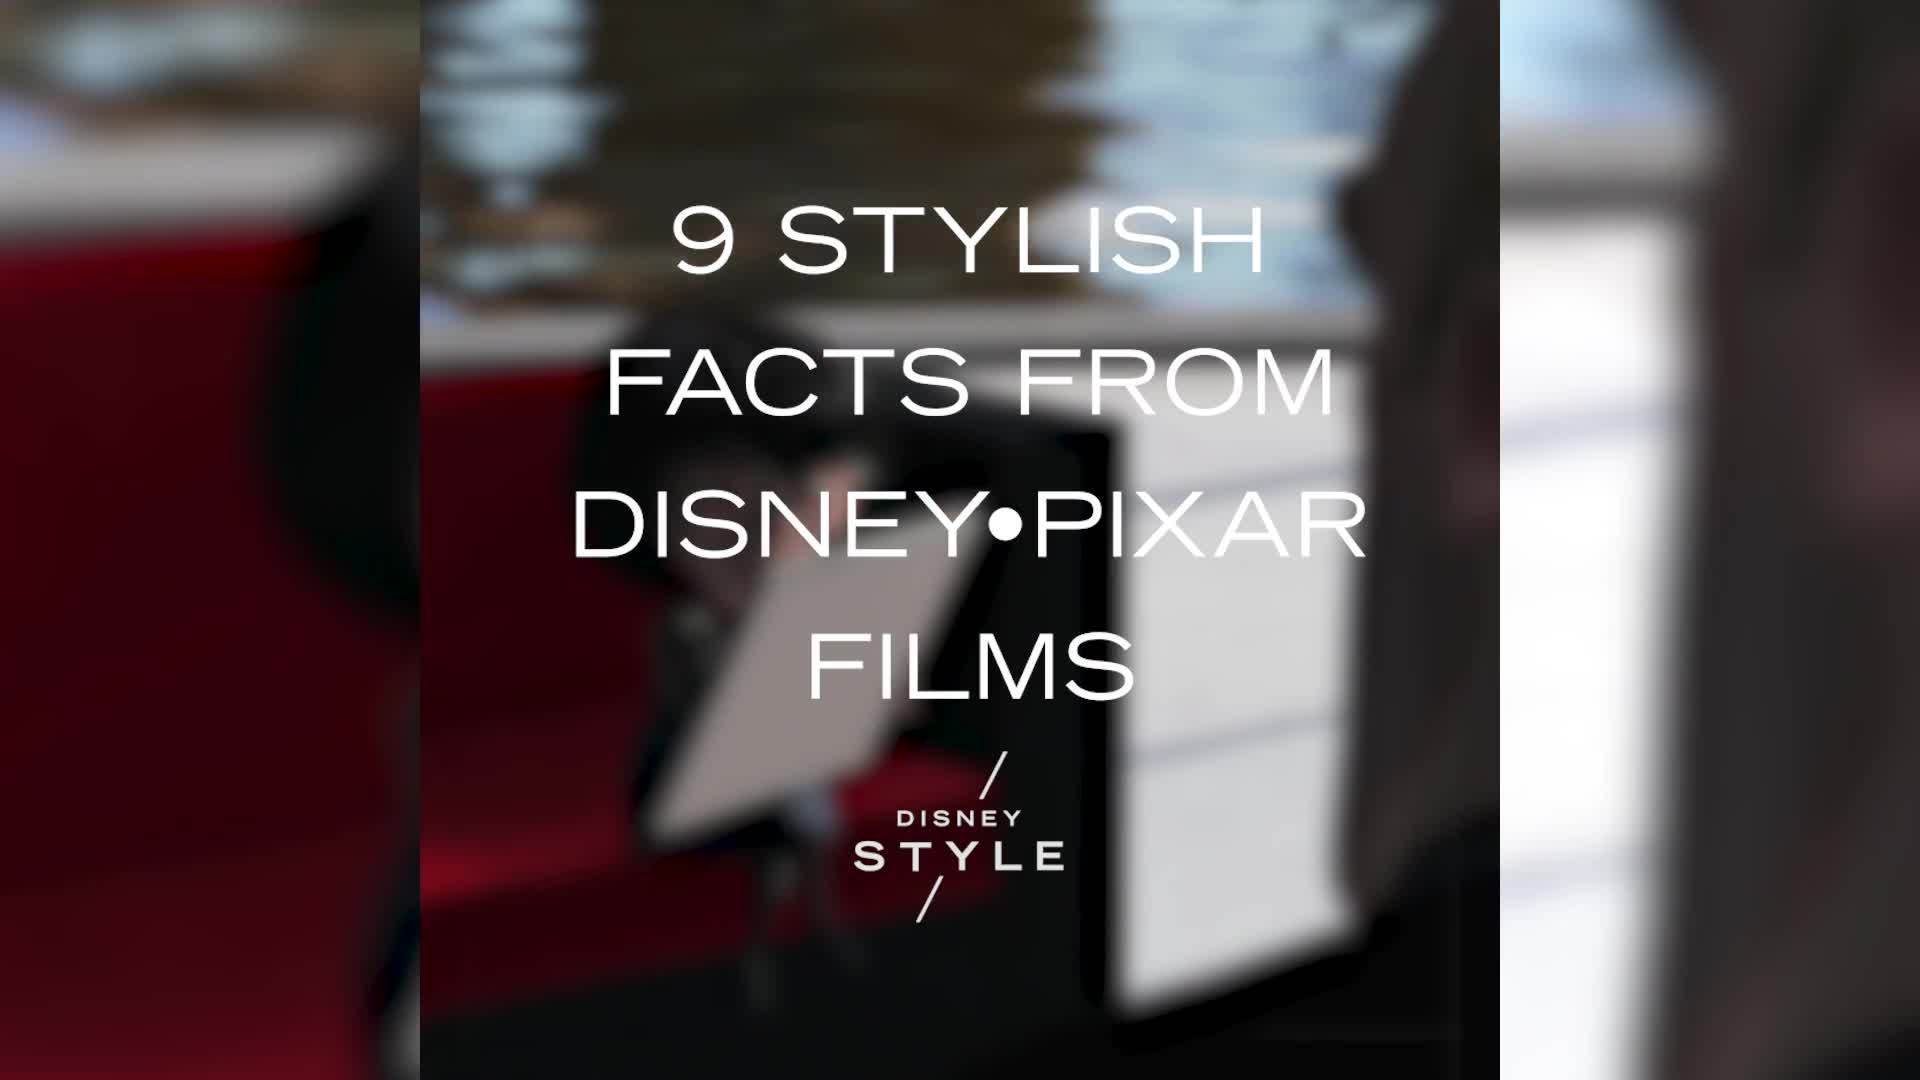 9 Stylish Facts From Disney•Pixar Films | Facts by Disney Style